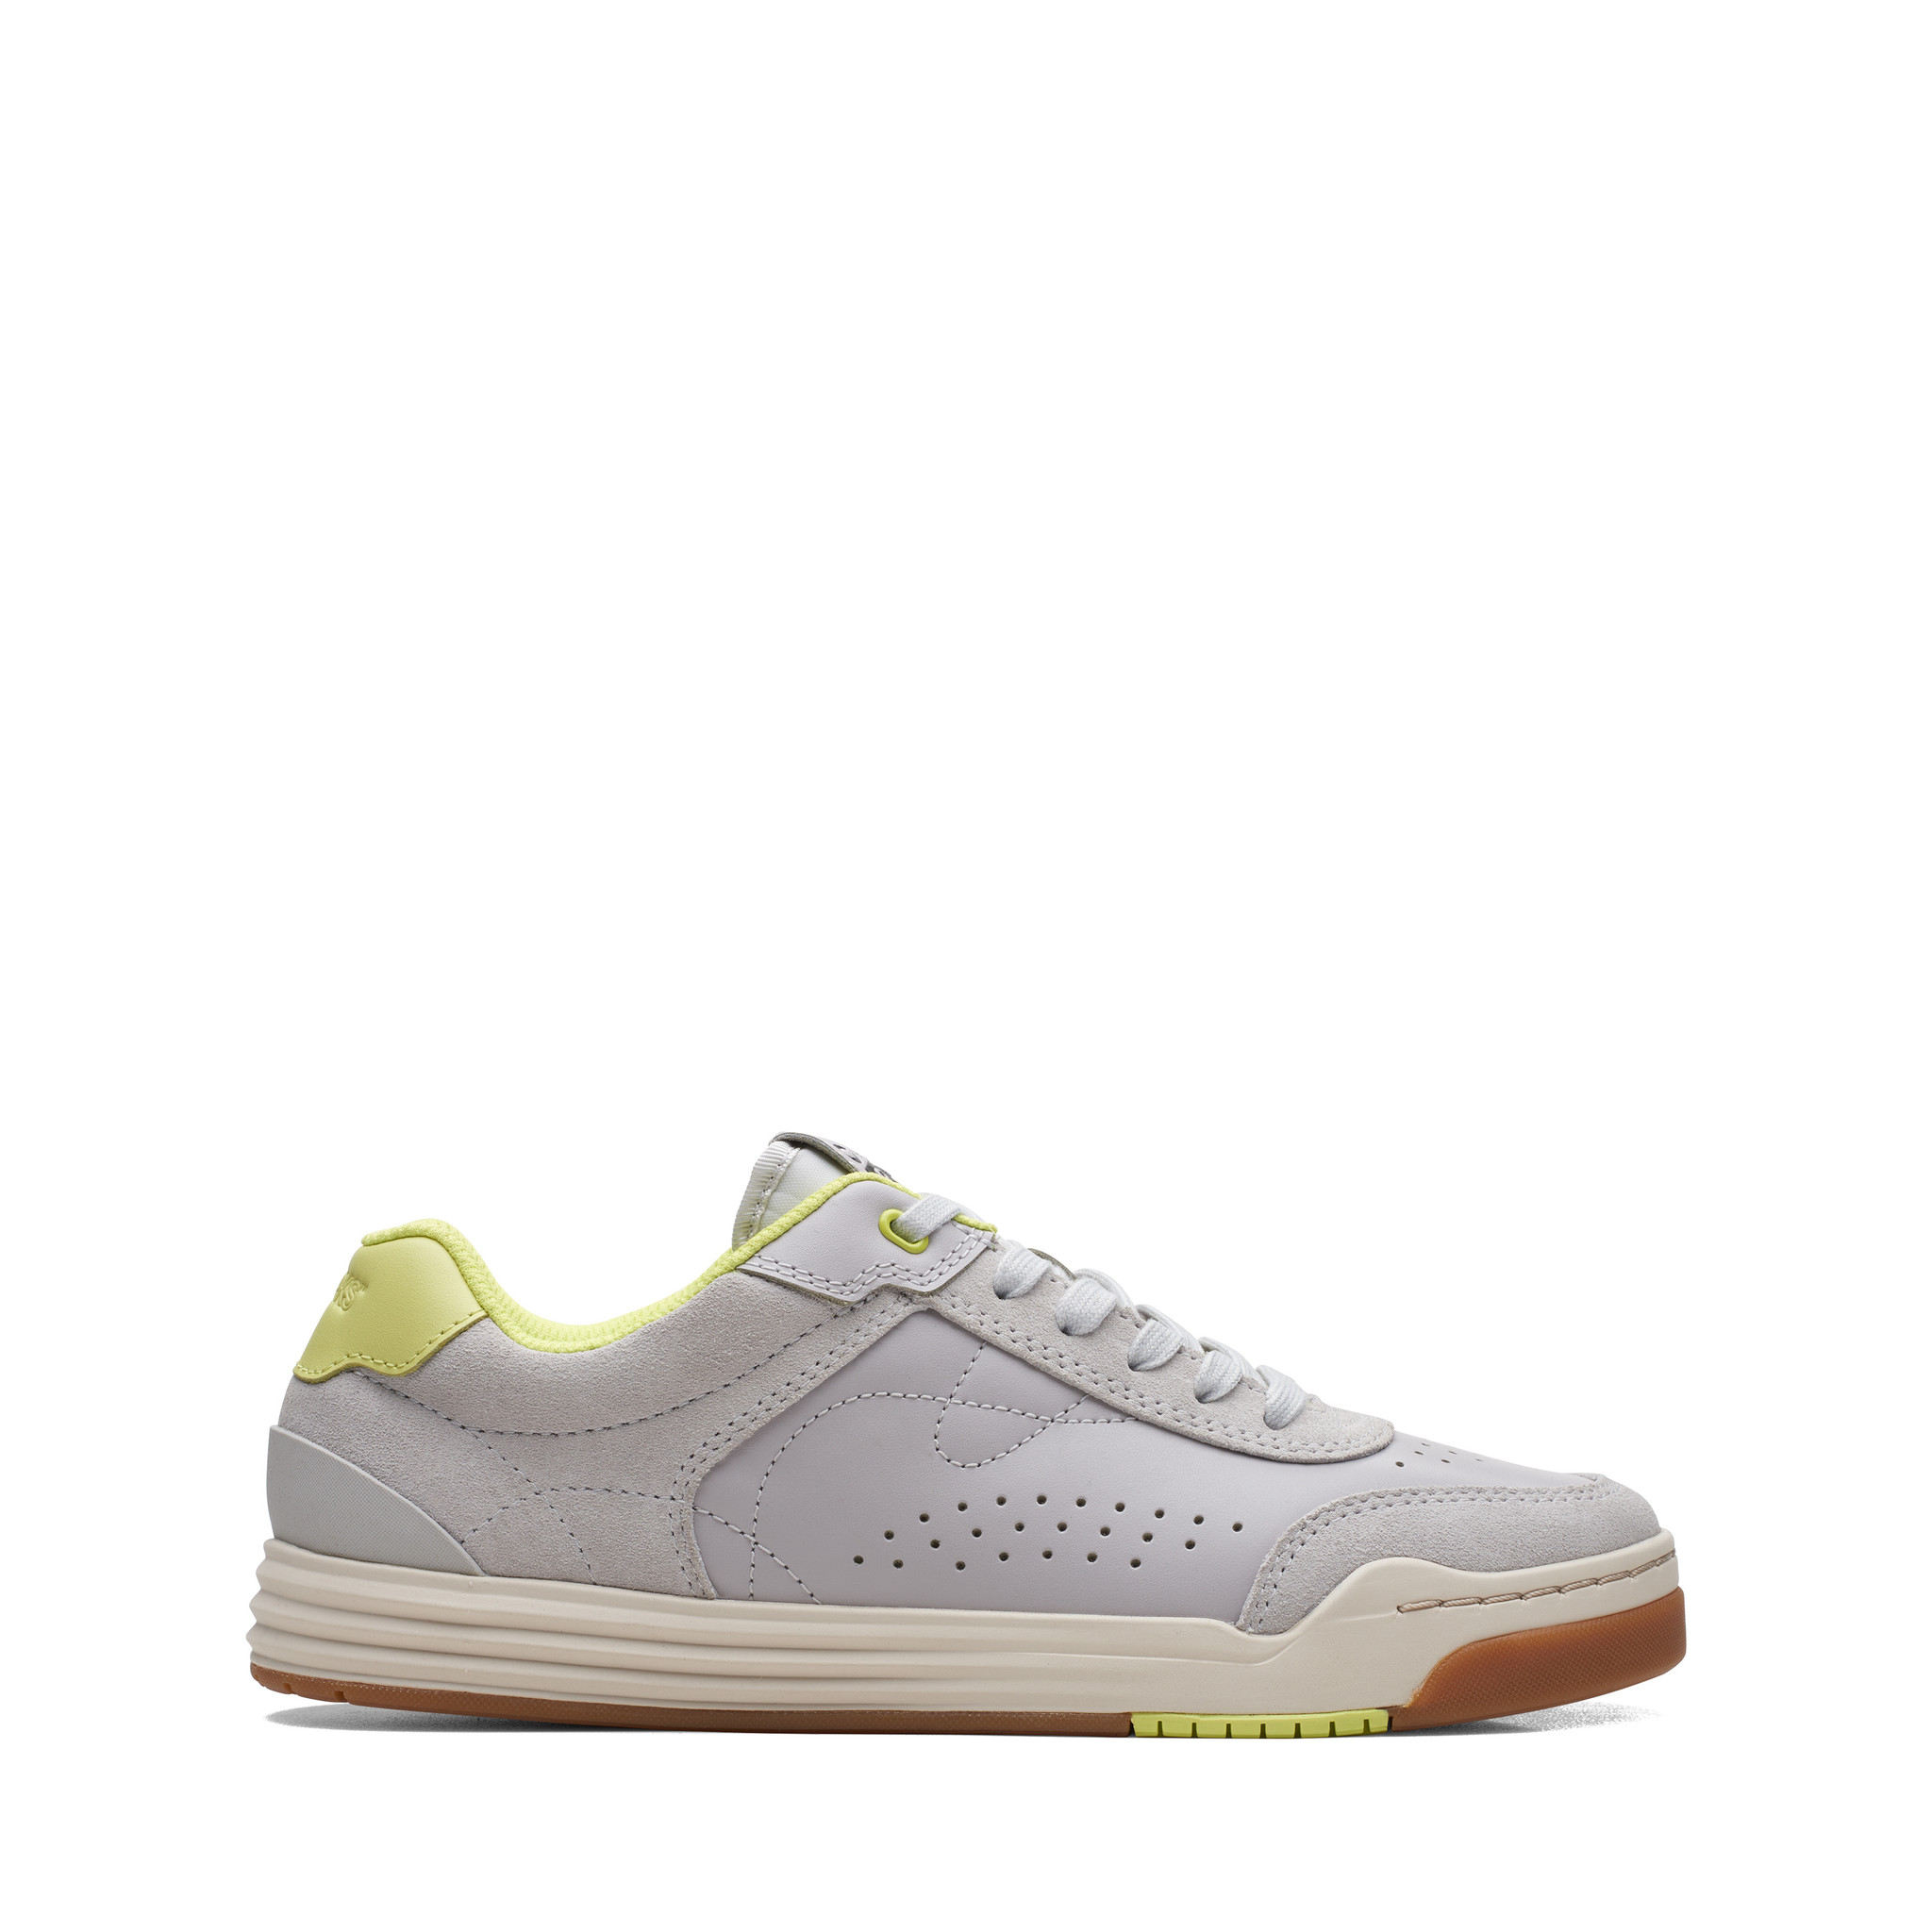 Clarks Cica 2.0 Grey Combi Youth